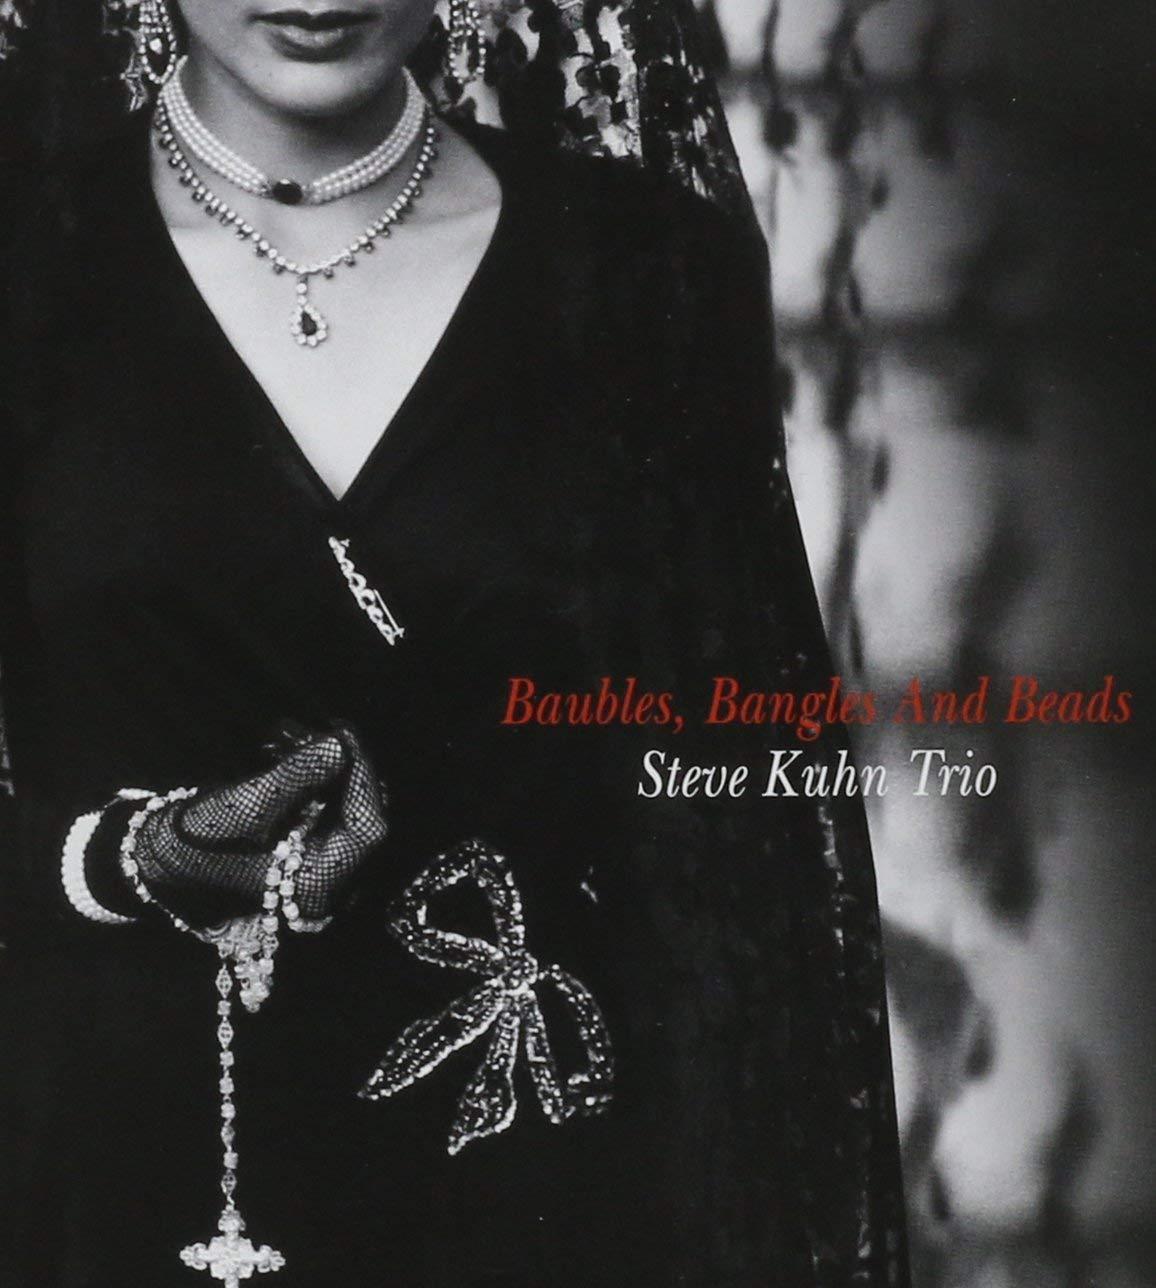 Baubles, Bangles And Beads / Steve Kuhn Trio